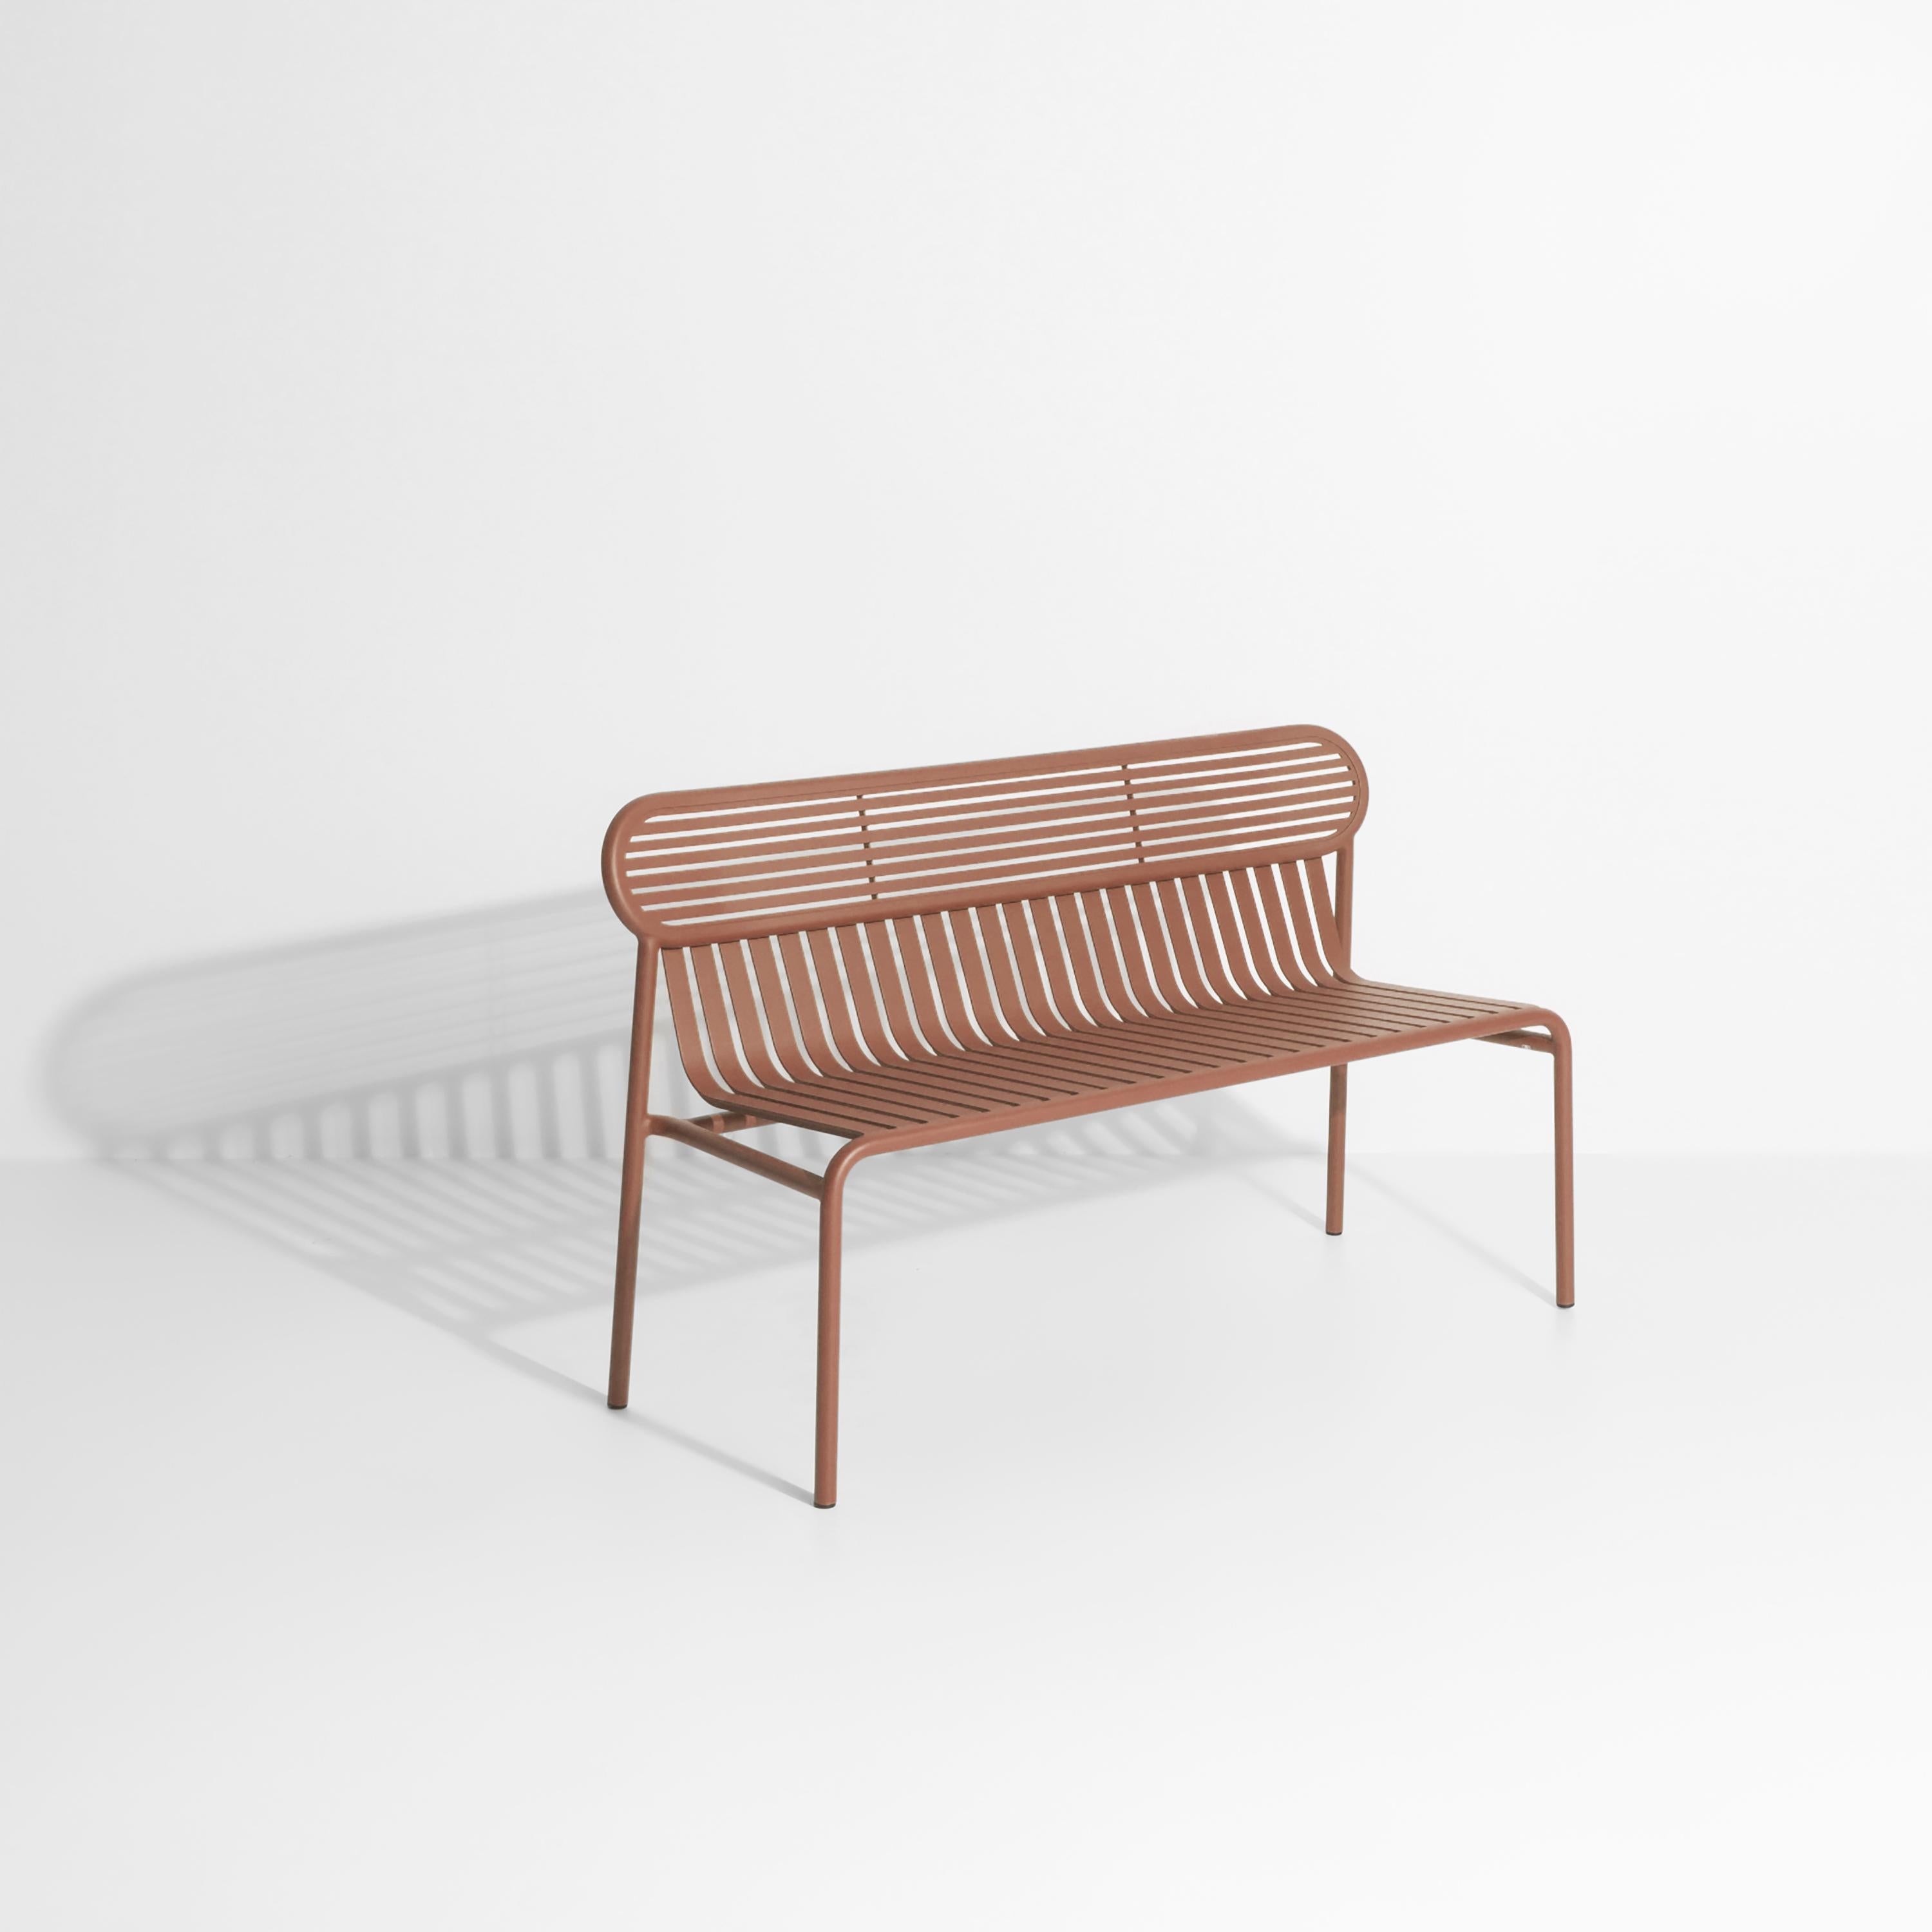 Petite Friture Week-End Bench in Terracotta Aluminium by Studio BrichetZiegler, 2017

The week-end collection is a full range of outdoor furniture, in aluminium grained epoxy paint, matt finish, that includes 18 functions and 8 colours for the